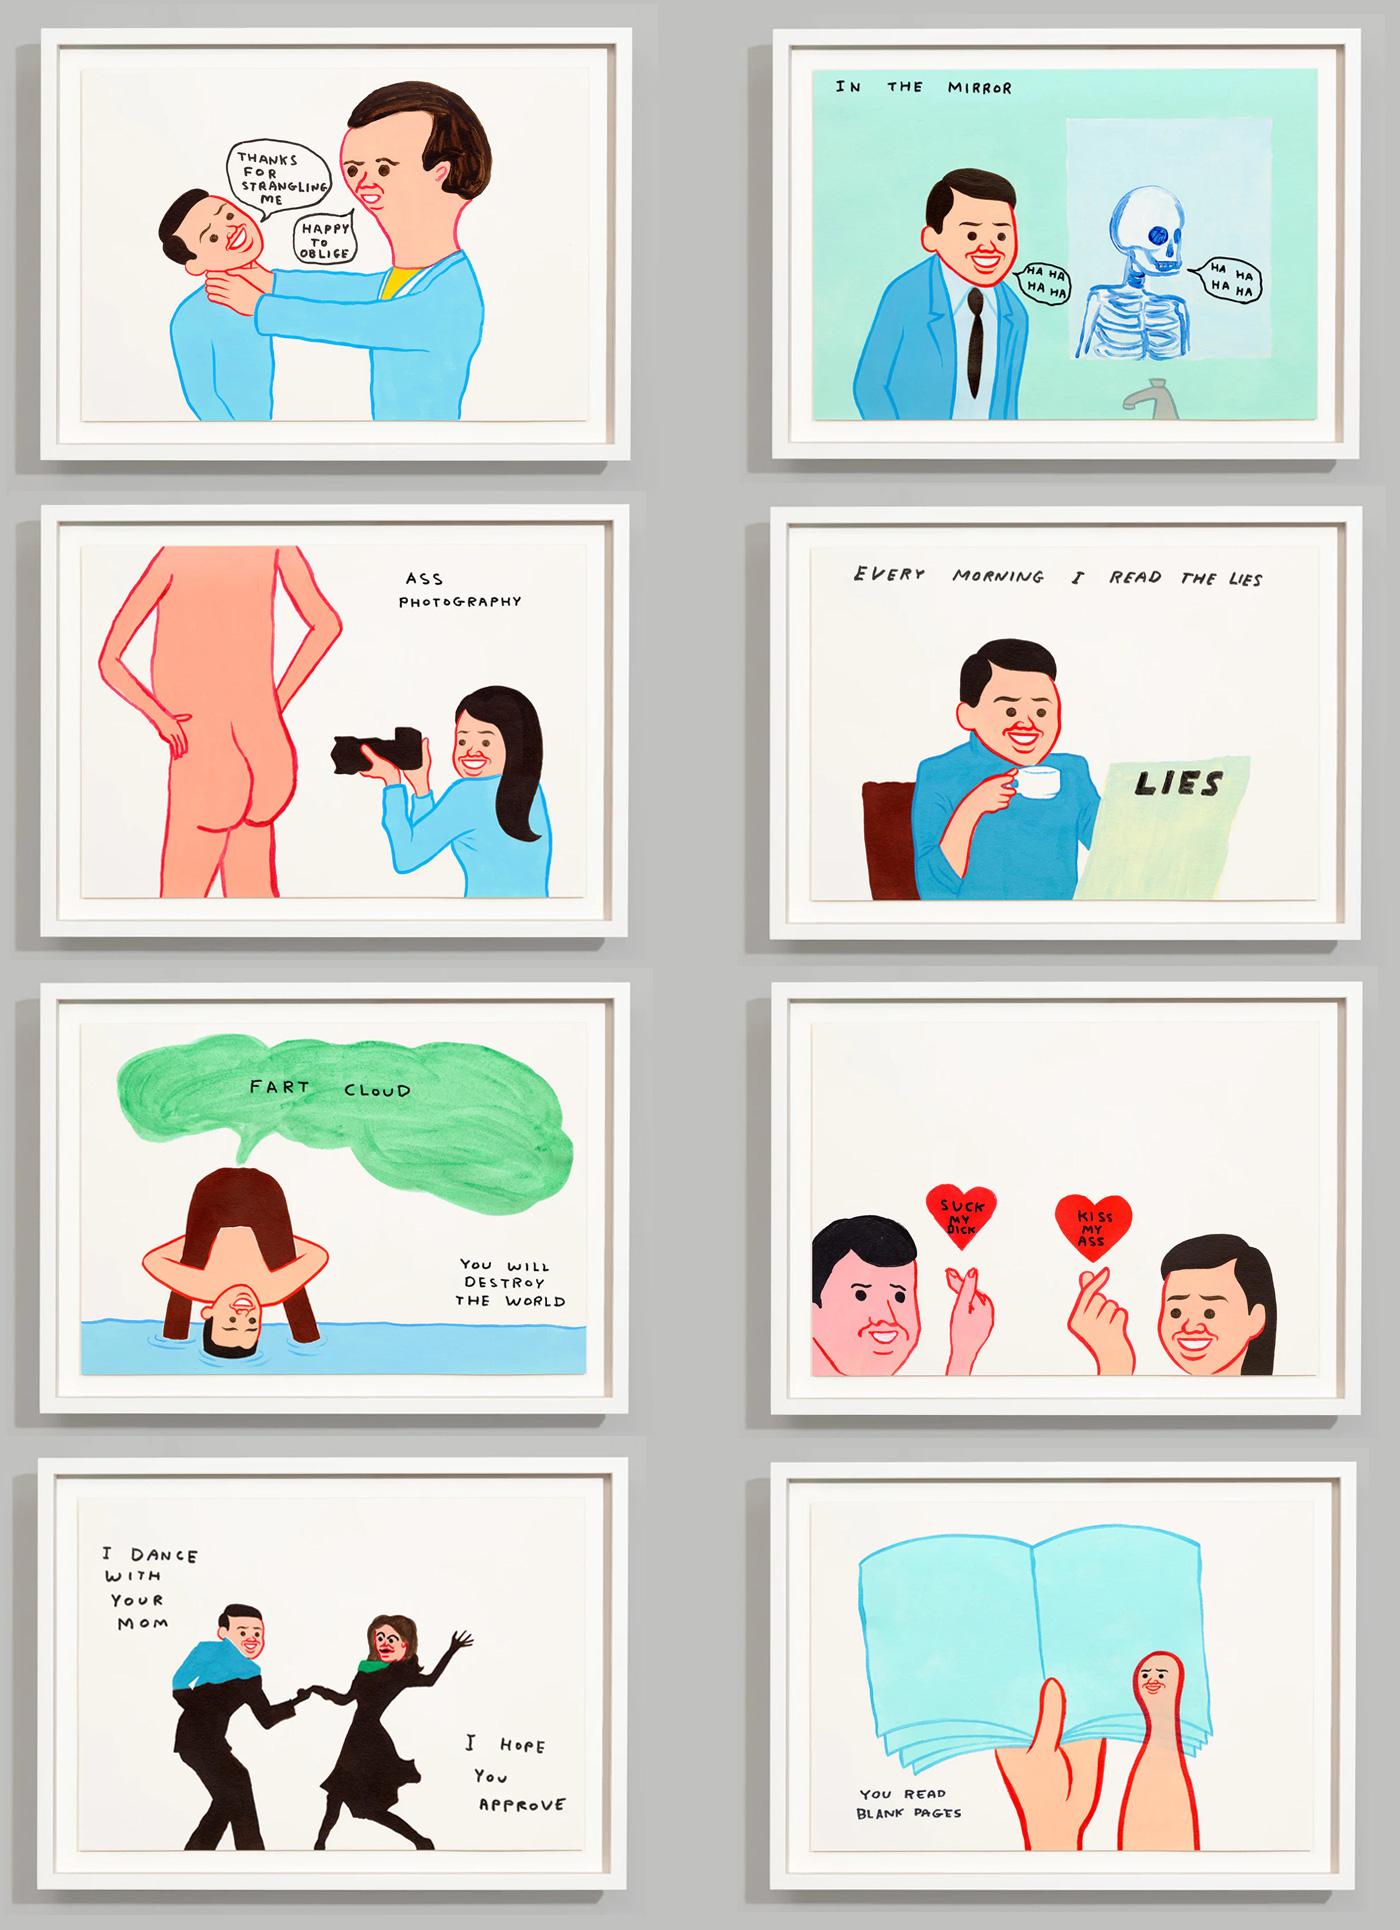 David Shrigley + Joan Cornellà - VOTE (SET OF 8)

Date of creation: 2022
Medium: Silkscreen on paper
Edition: 125
Size: 32.4 x 43.2 cm (each)
Condition: In mint conditions, never framed and shipped inside its custom box
Joan Cornellà and David